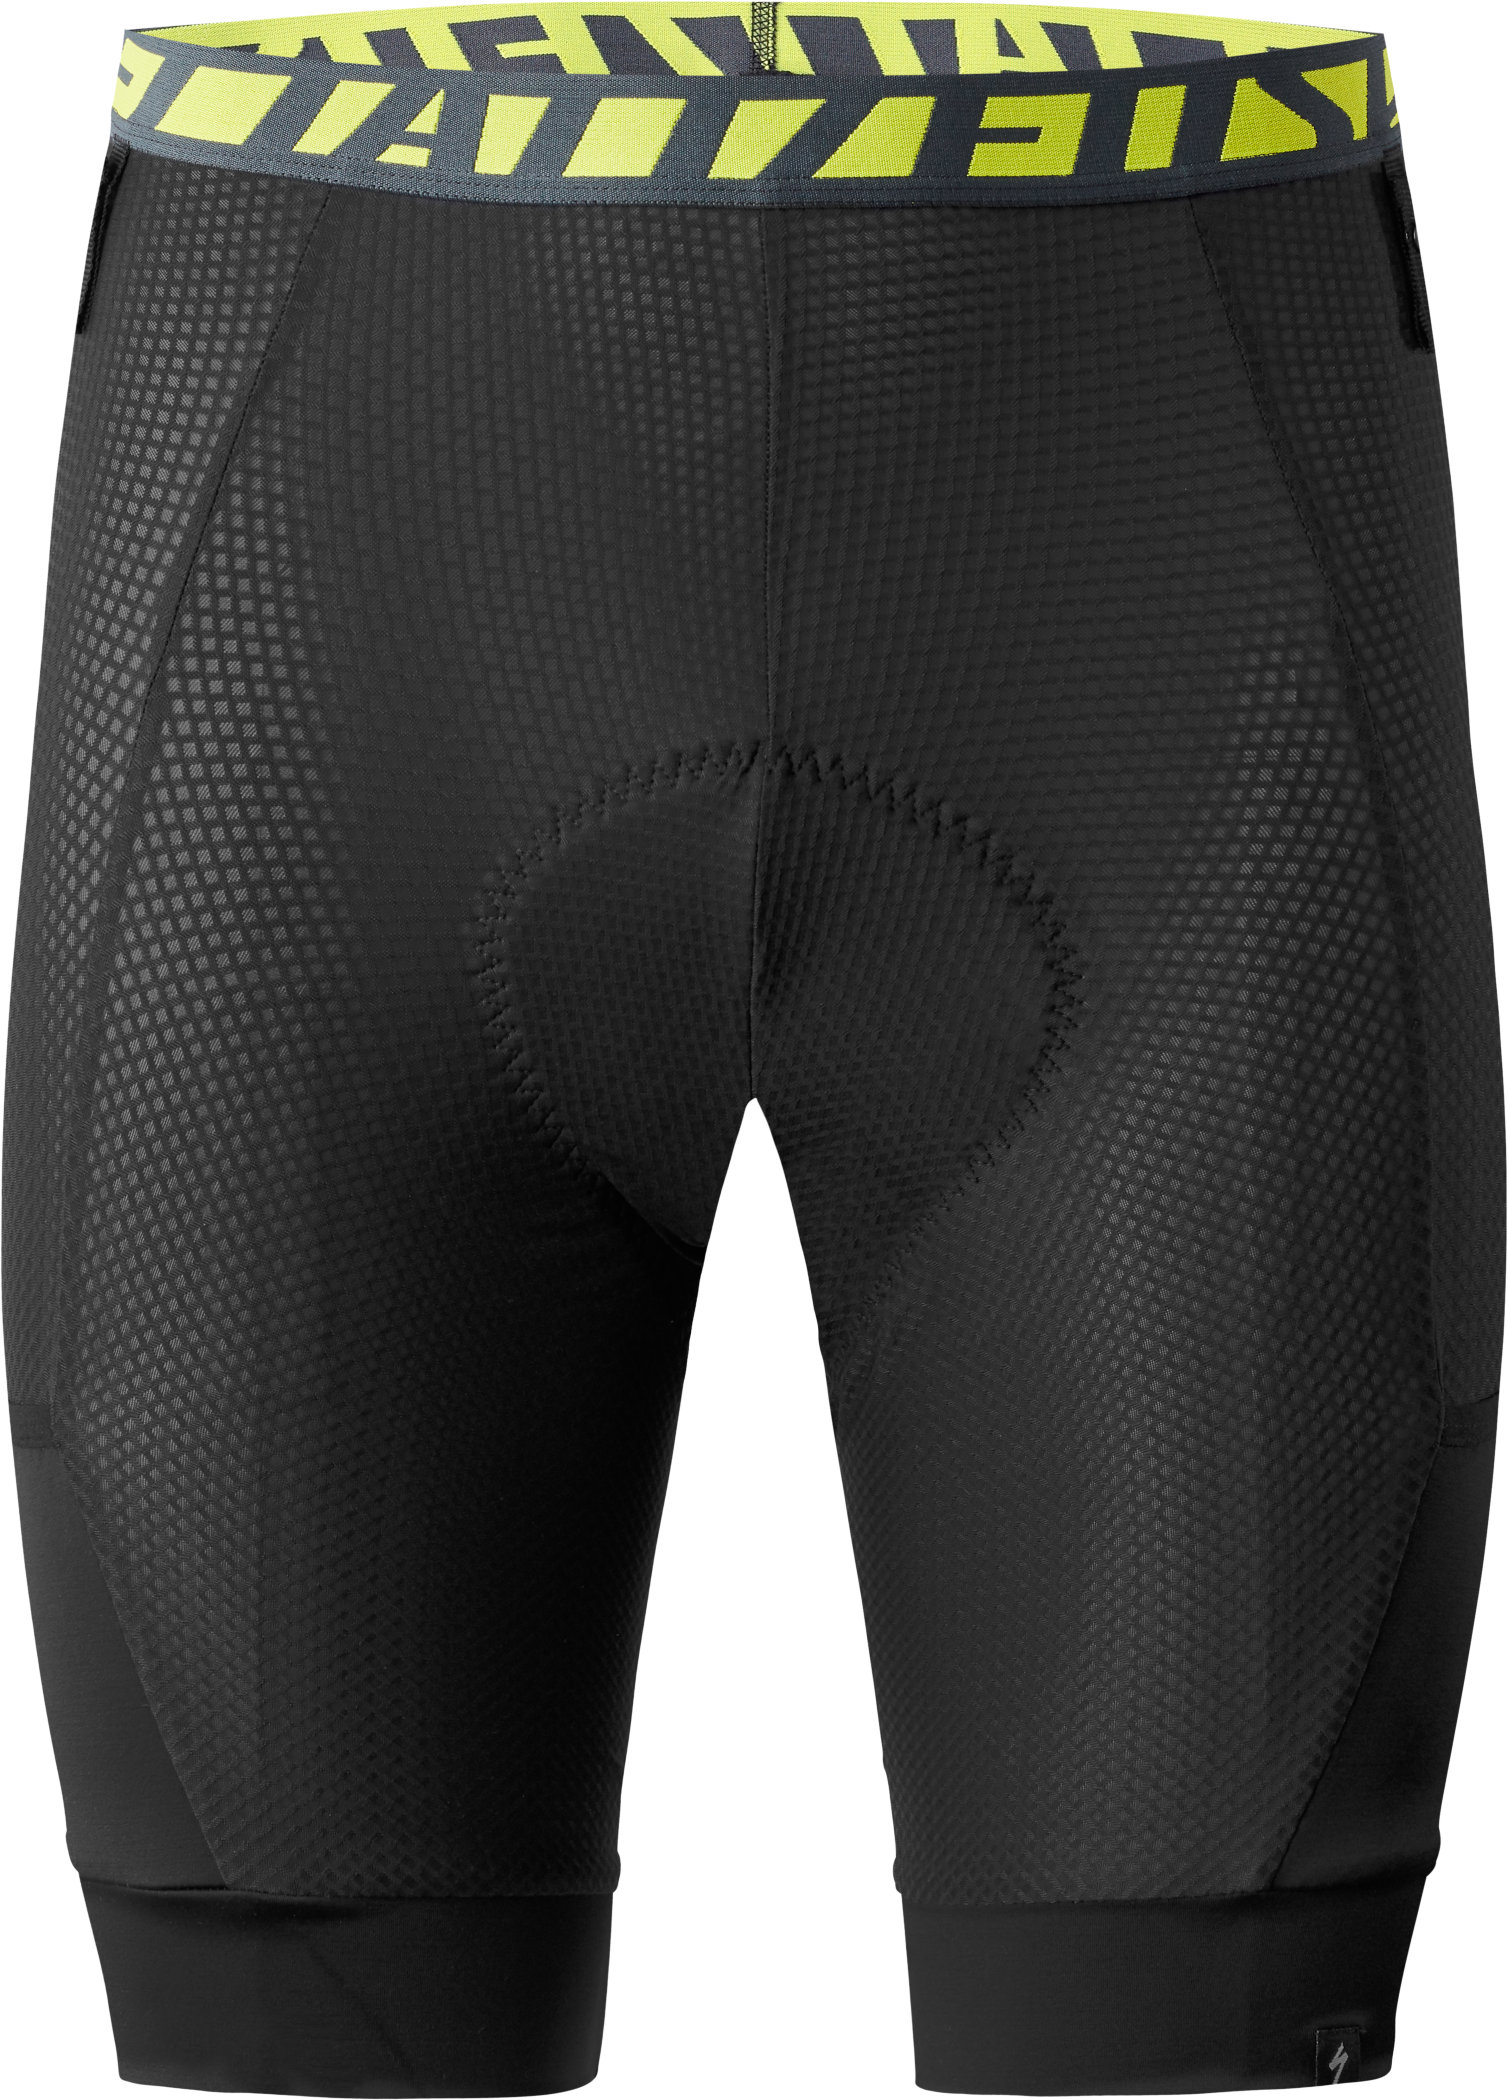 swat shorts specialized